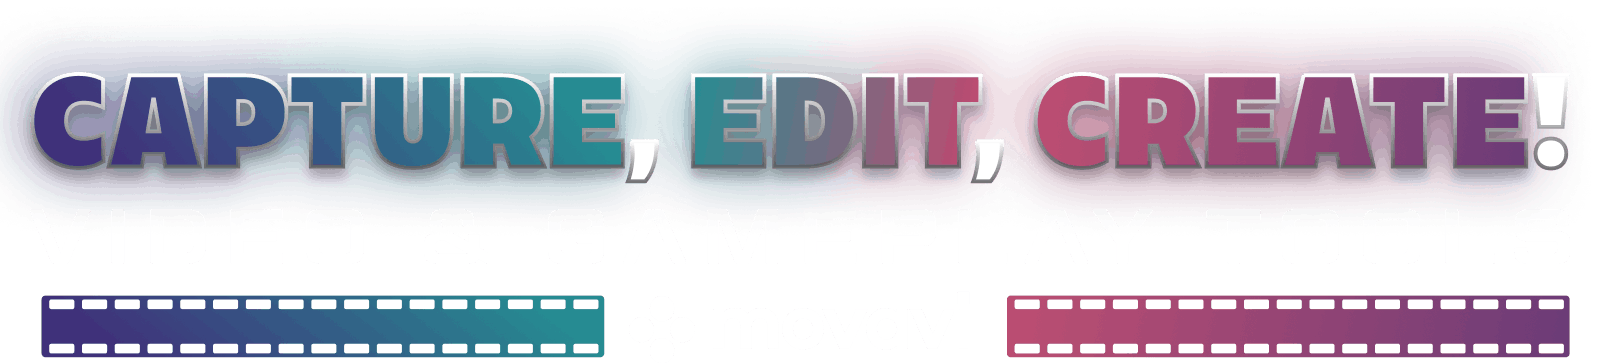 Capture, Edit, Create! Video & Gameplay Tools by Movavi